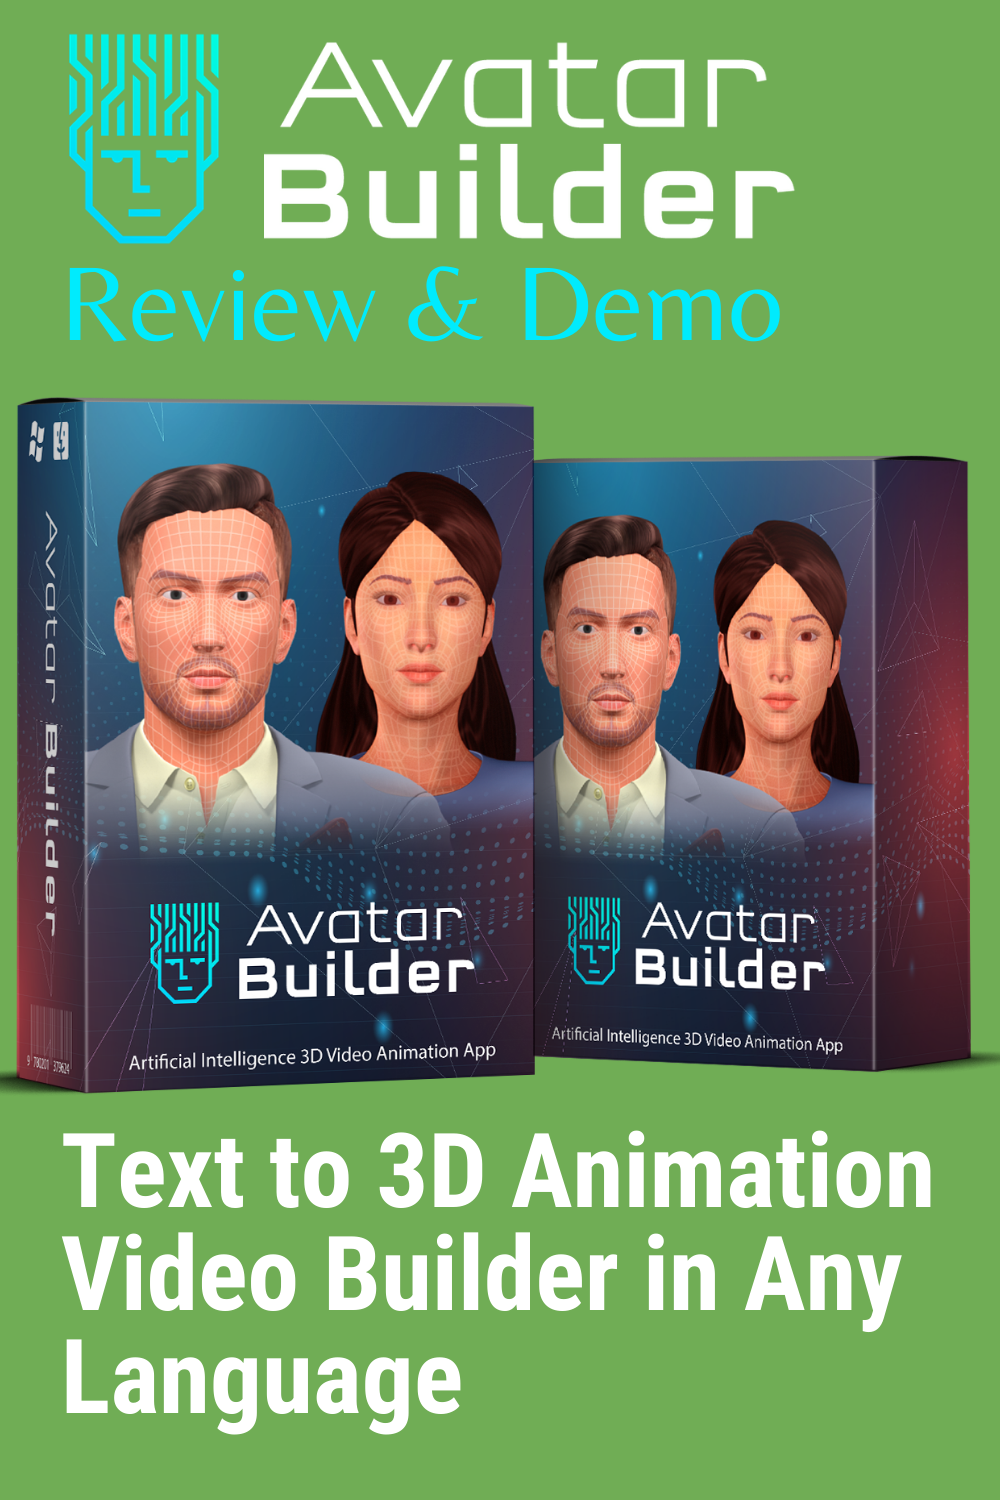 AvatarBuilder Review & Demo - Text to 3D Animation Video Builder in Any Language